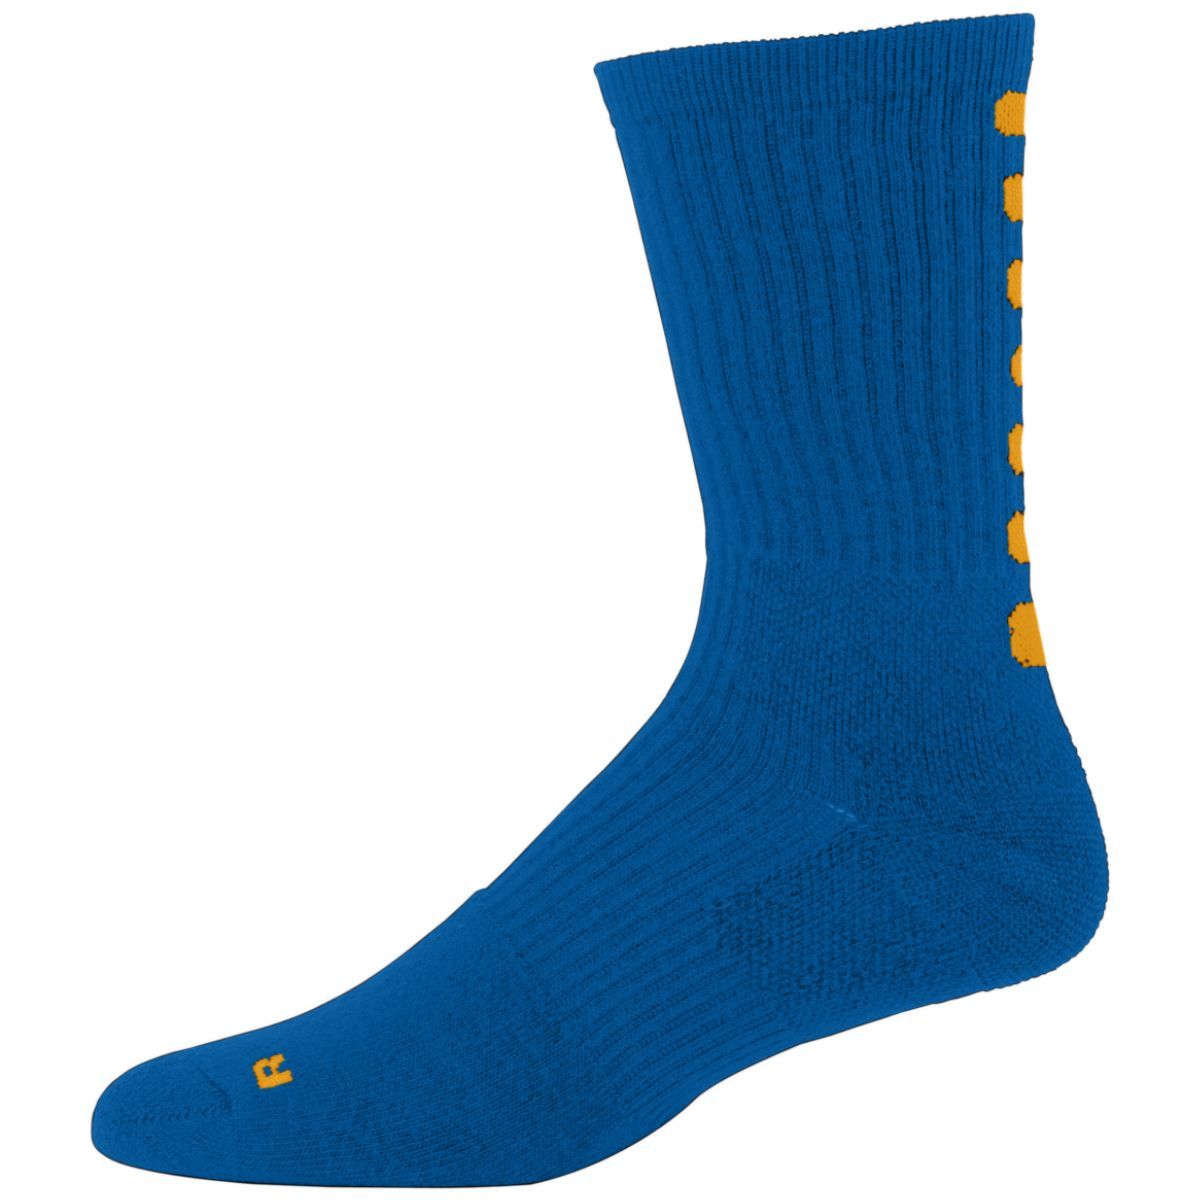 Augusta Sportswear Color Block Crew Sock in Royal/Gold  -Part of the Adult, Augusta-Products, Accessories-Socks product lines at KanaleyCreations.com